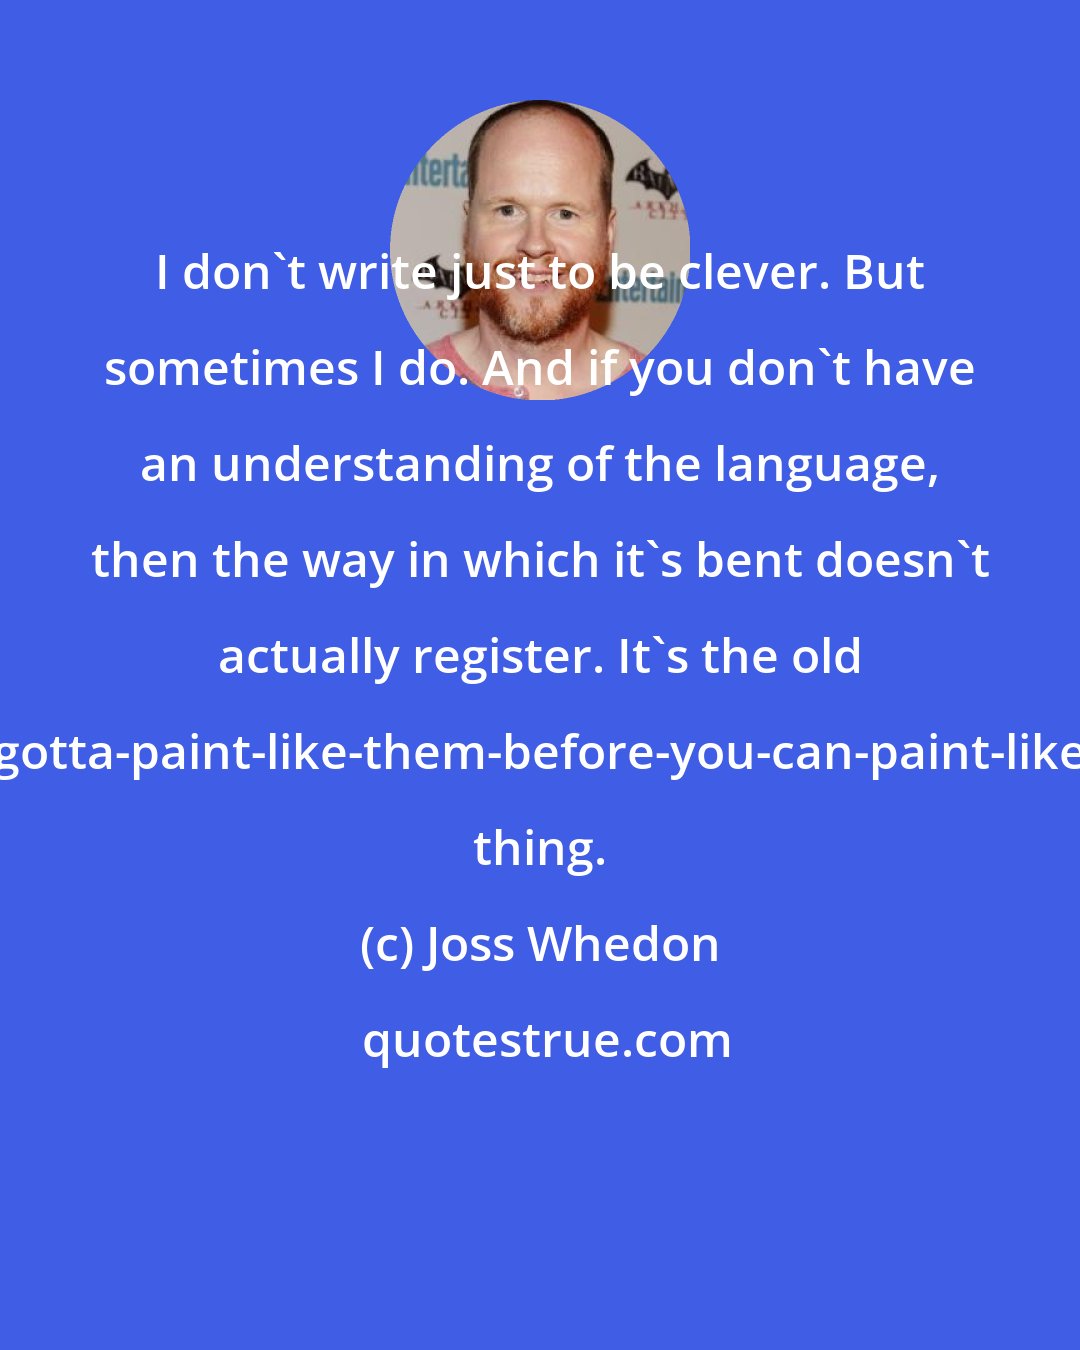 Joss Whedon: I don't write just to be clever. But sometimes I do. And if you don't have an understanding of the language, then the way in which it's bent doesn't actually register. It's the old you-gotta-paint-like-them-before-you-can-paint-like-you thing.